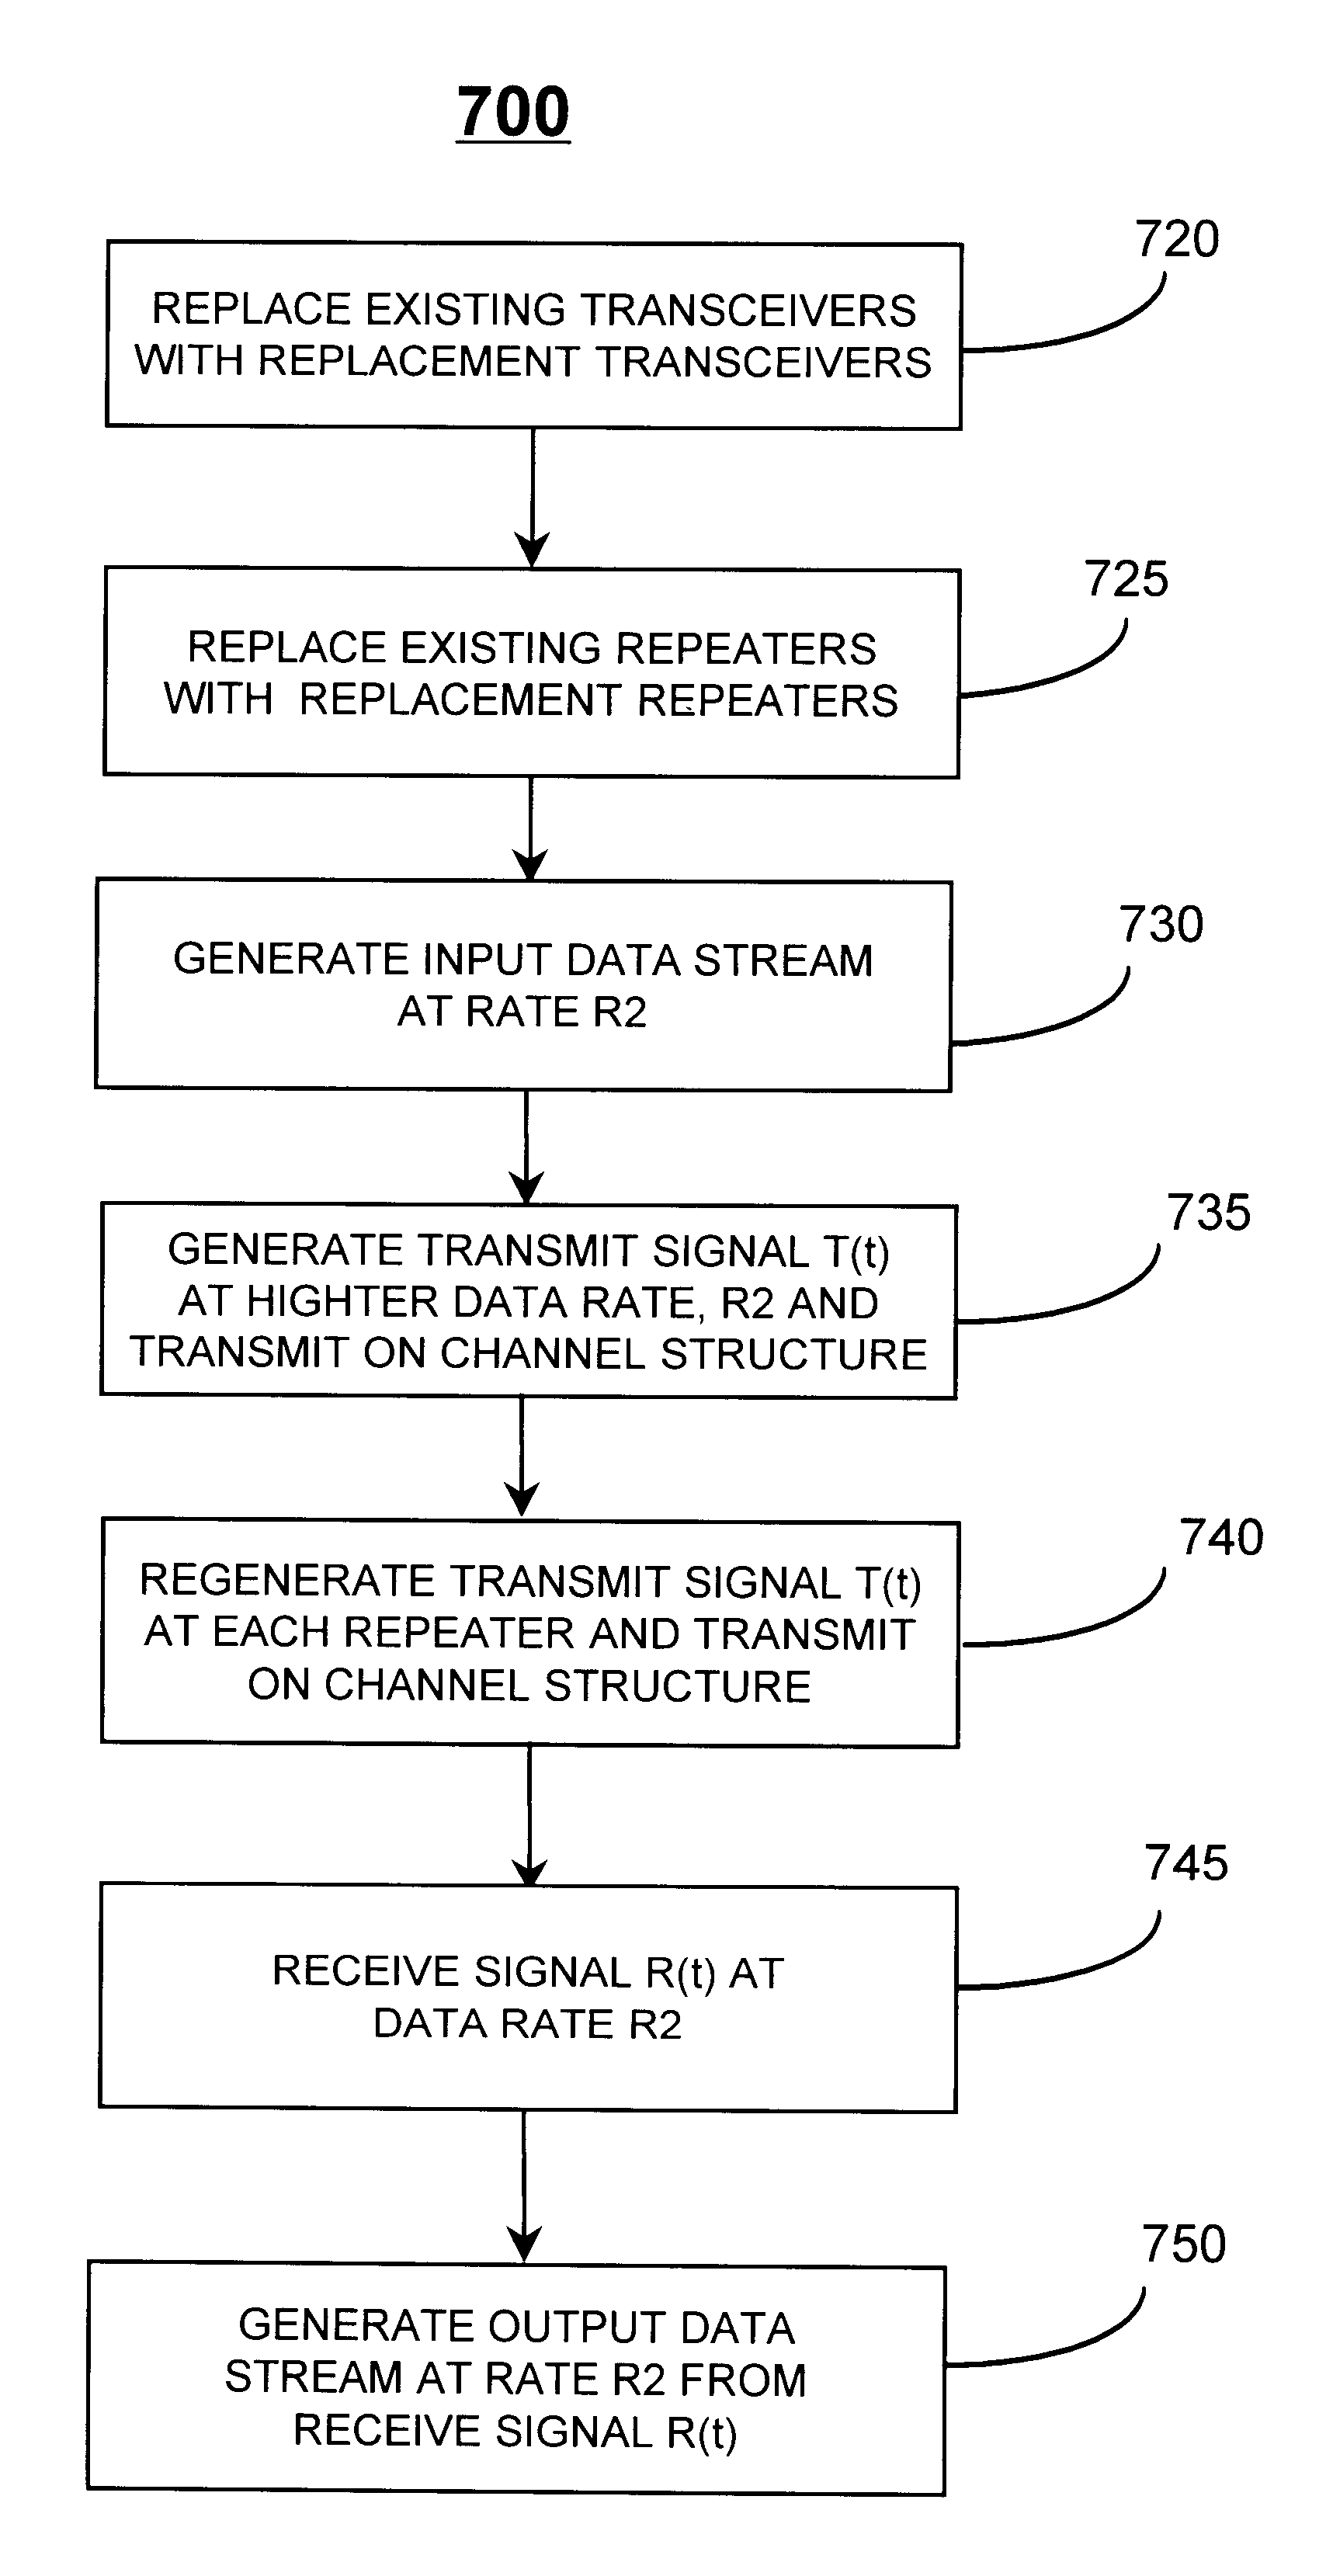 System, methods and apparatus for increasing the data rate on an existing repeatered telecommunication channel structure